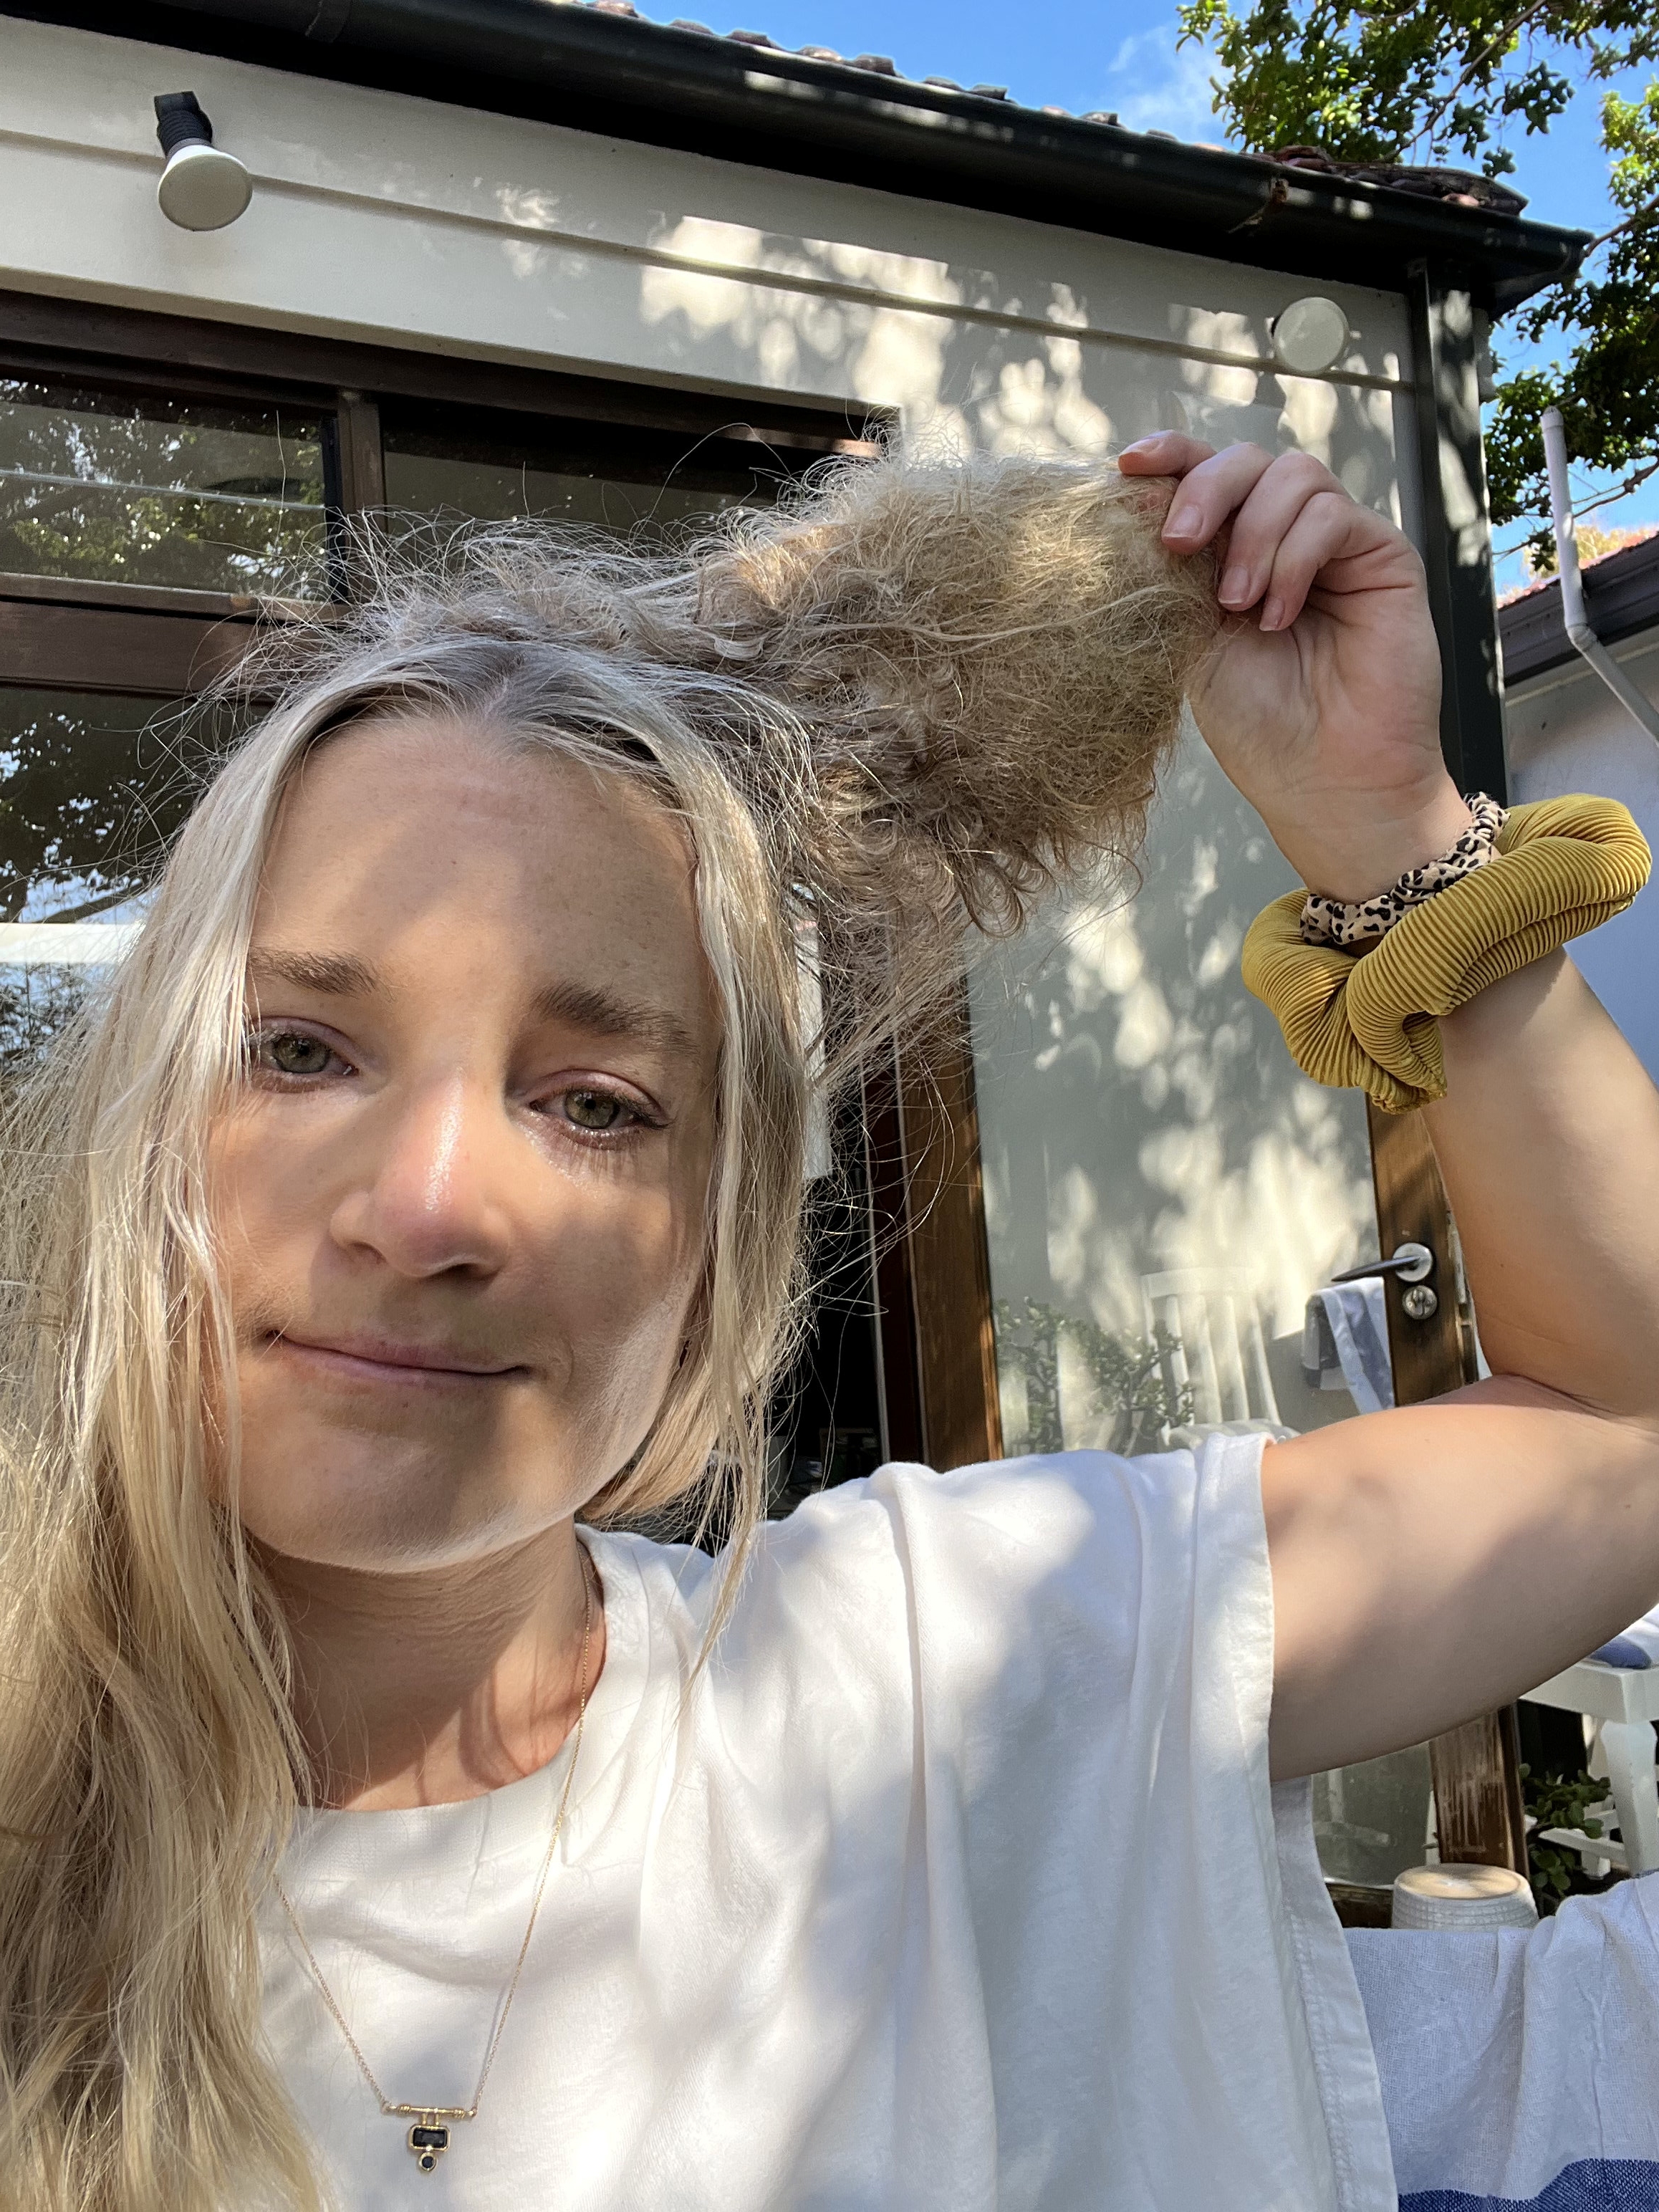 75 Pulling a big clump of hair out of the drain - 1000 Awesome Things